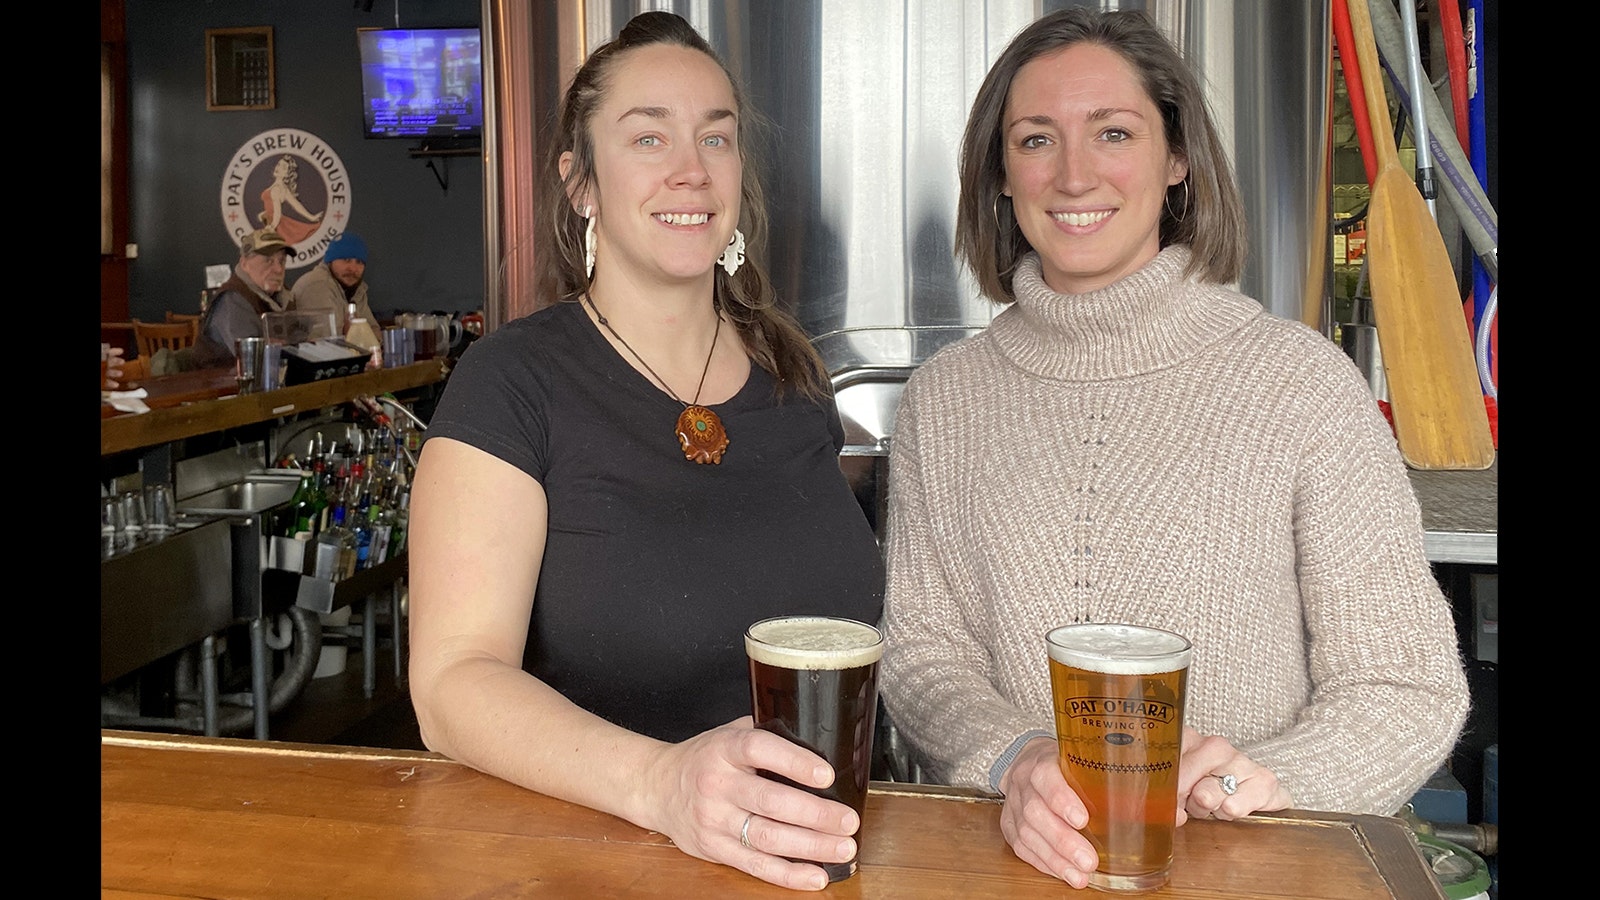 Pat's Brew House is Wyoming's first all-women brewery and includes brewer Alexandria Cain, left, and owner Norfleet Gifford.